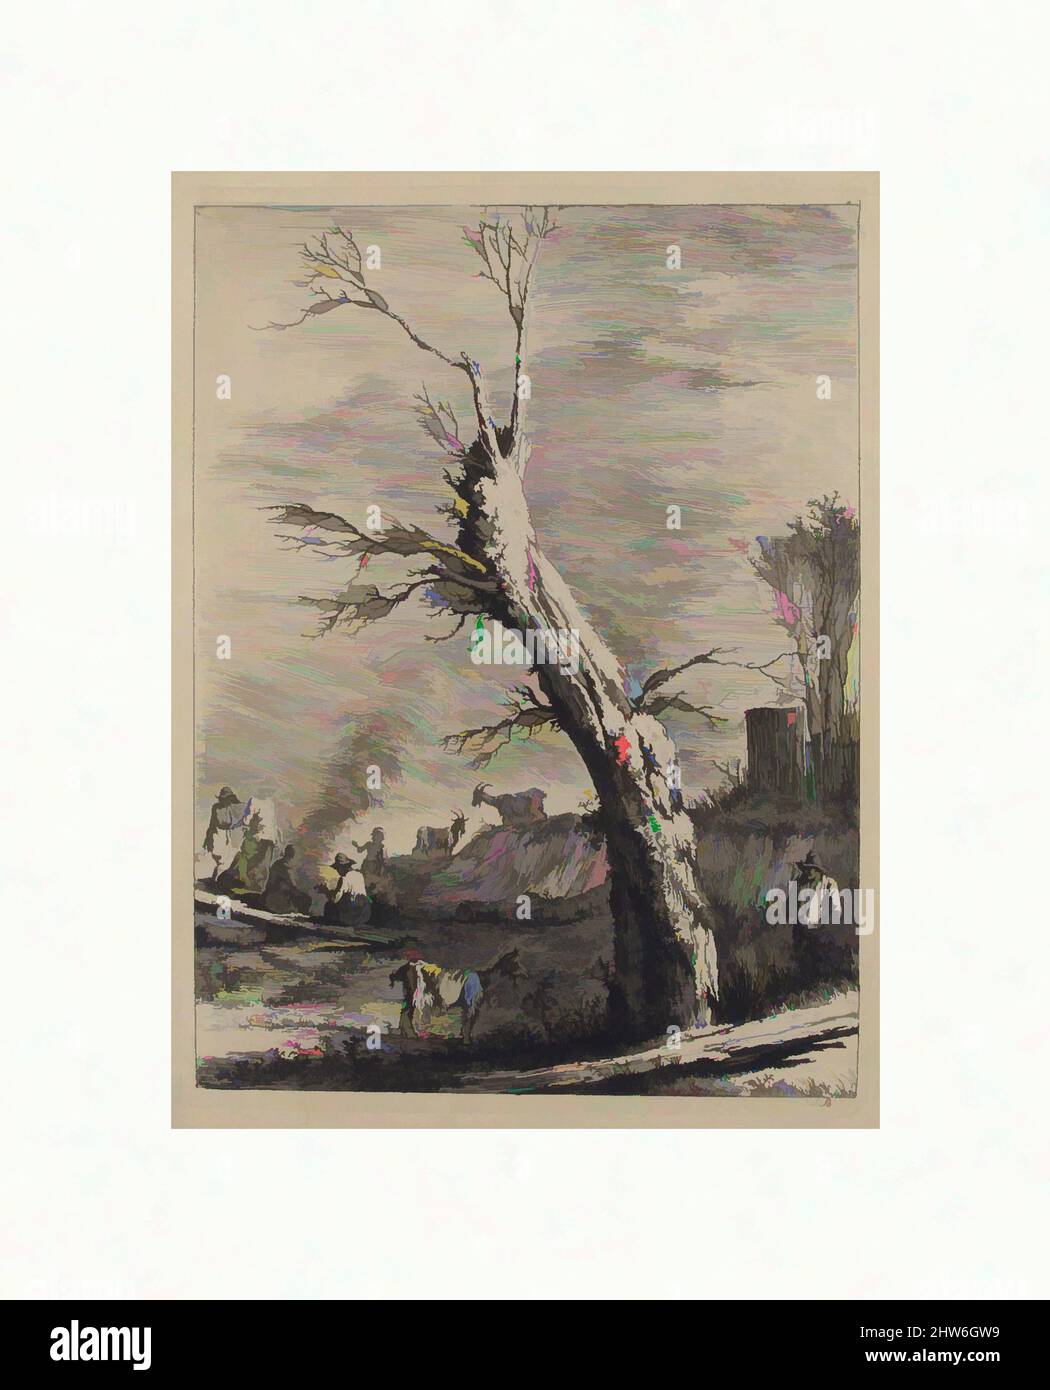 Art inspired by Winter, after a drawing completed in Saint-Chamond, 1795, Etching with drypoint and roulette; fourth state of four, Sheet: 11 5/8 x 8 9/16 in. (29.6 x 21.7 cm), Prints, Jean Jacques de Boissieu (French, Lyons 1736–1810 Lyons, Classic works modernized by Artotop with a splash of modernity. Shapes, color and value, eye-catching visual impact on art. Emotions through freedom of artworks in a contemporary way. A timeless message pursuing a wildly creative new direction. Artists turning to the digital medium and creating the Artotop NFT Stock Photo